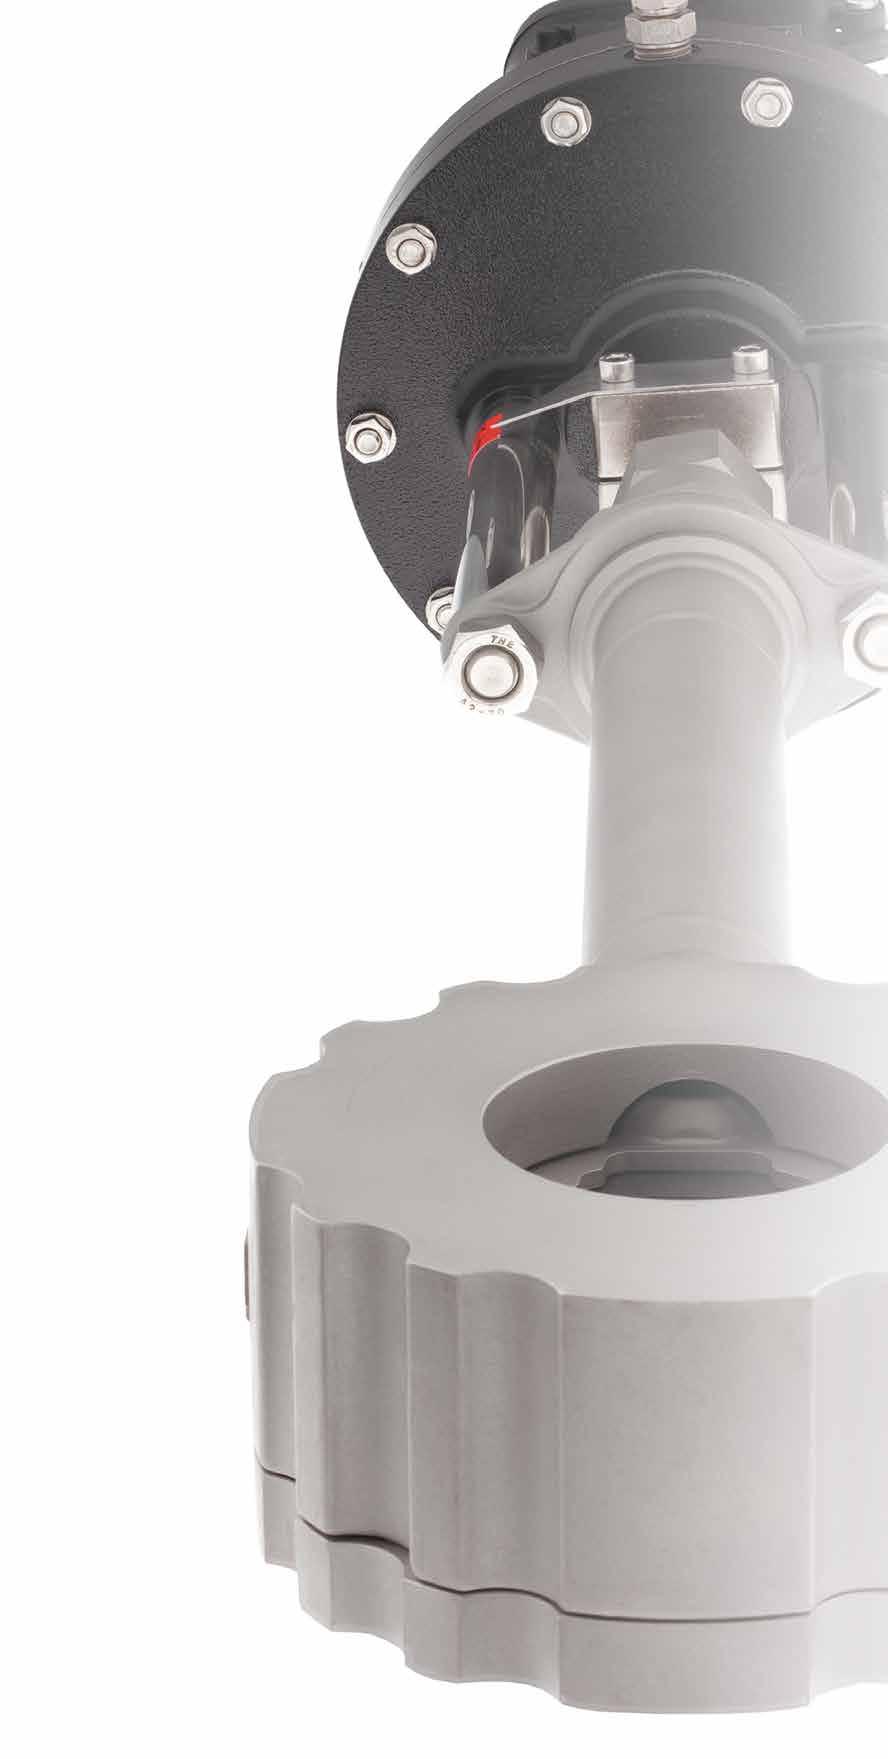 The sliding gate valve principle by Schubert & Salzer fast This is how easy control can be. Over 35 years ago, Schubert & Salzer Control Systems took a new approach in control valves.